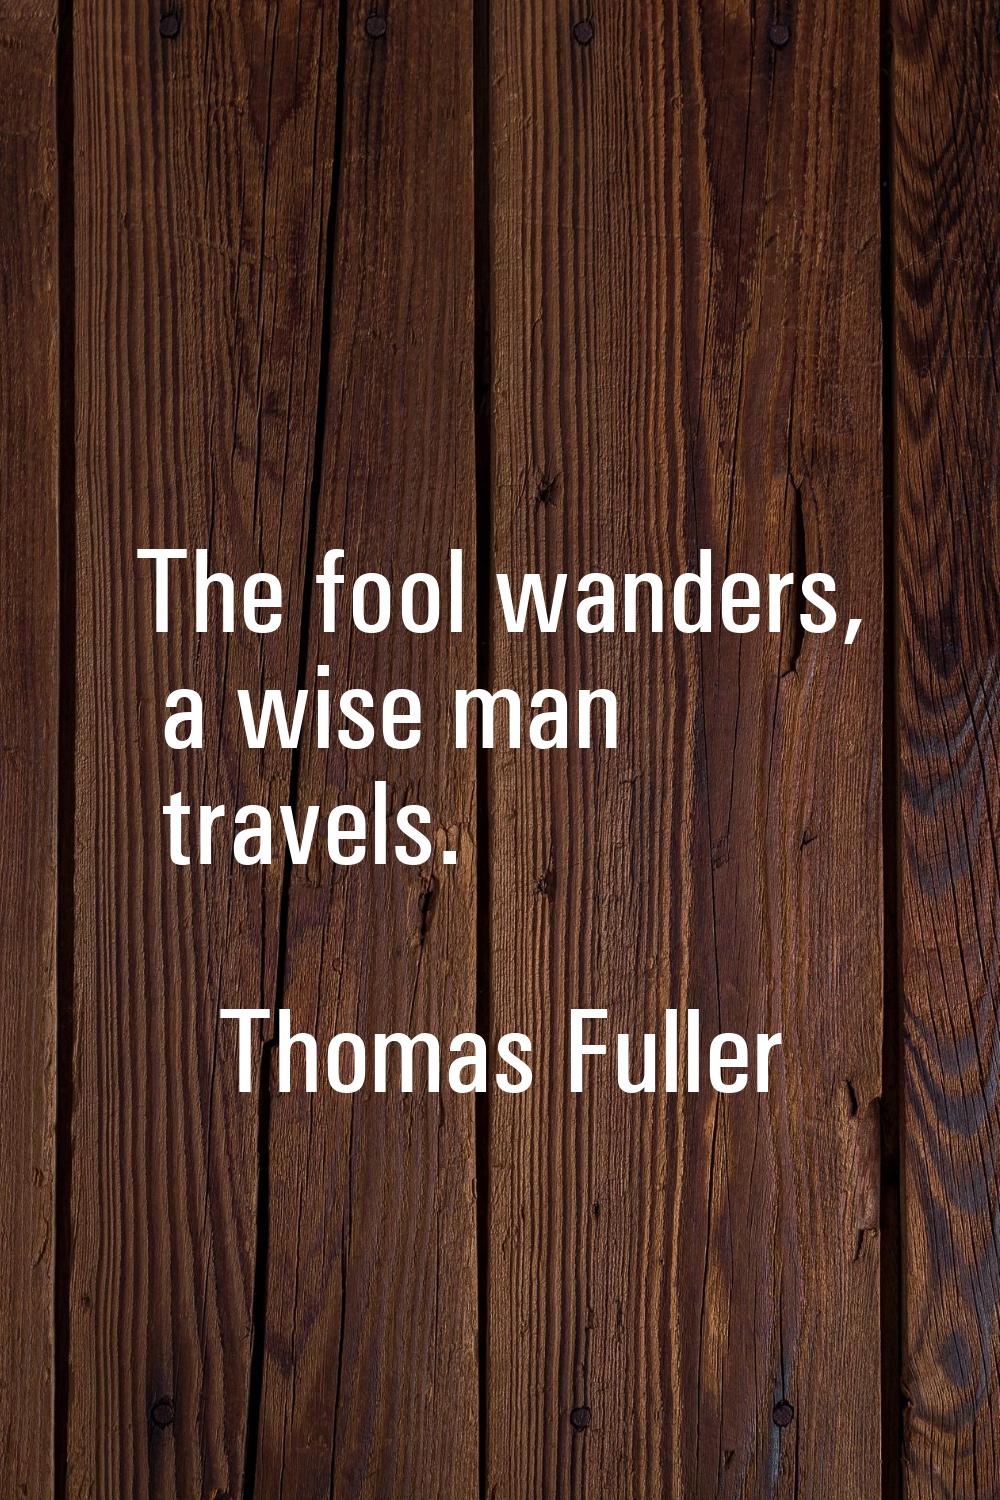 The fool wanders, a wise man travels.